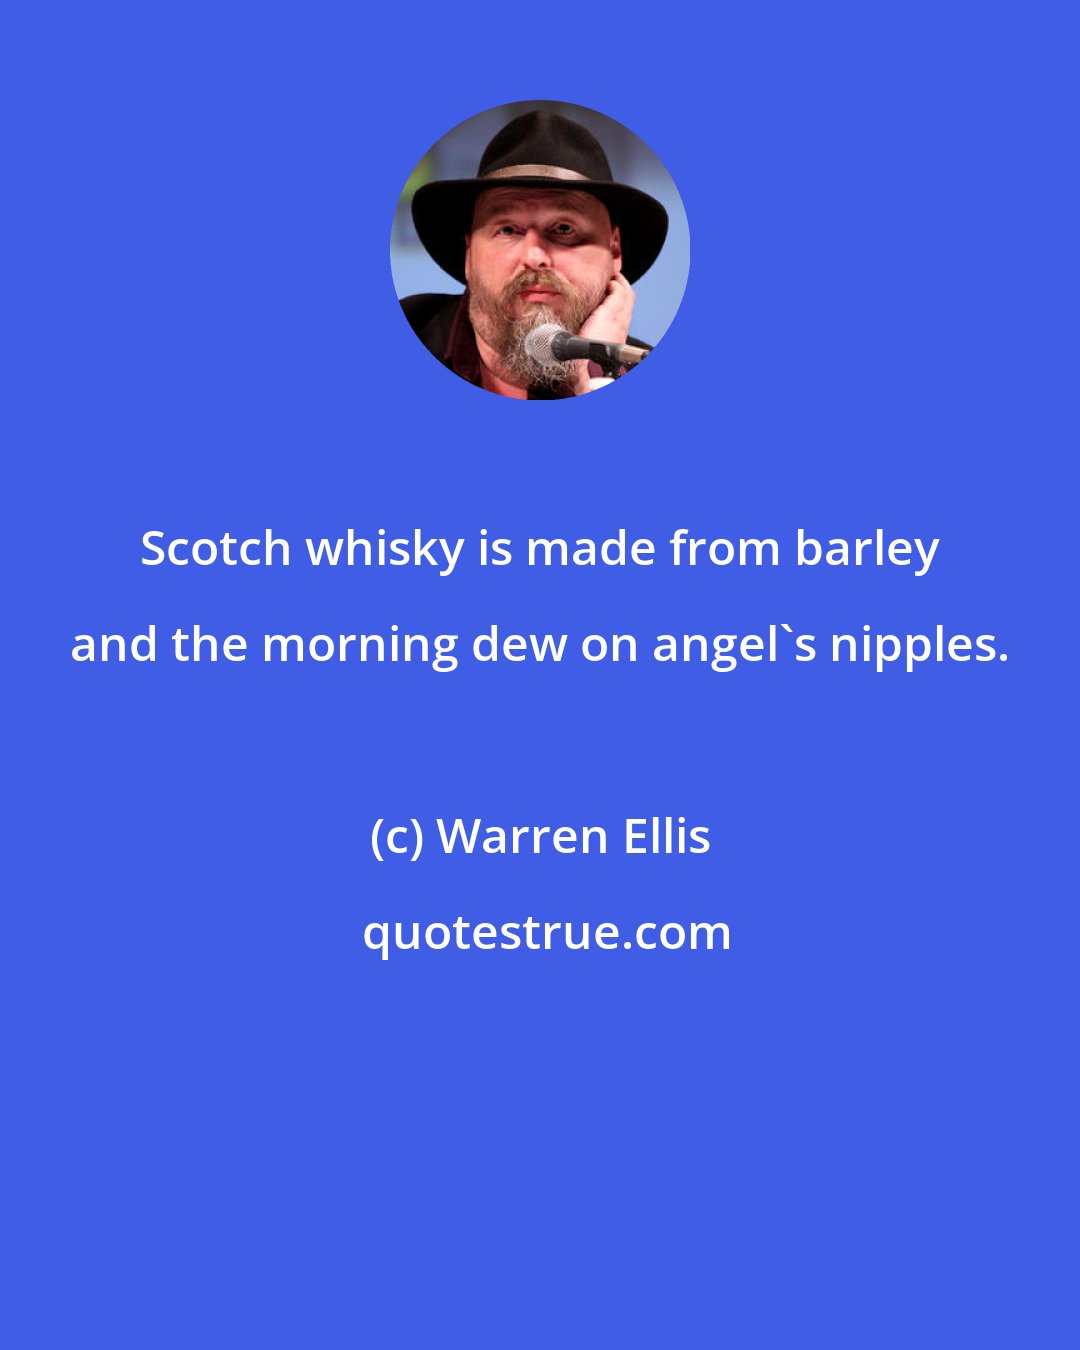 Warren Ellis: Scotch whisky is made from barley and the morning dew on angel's nipples.